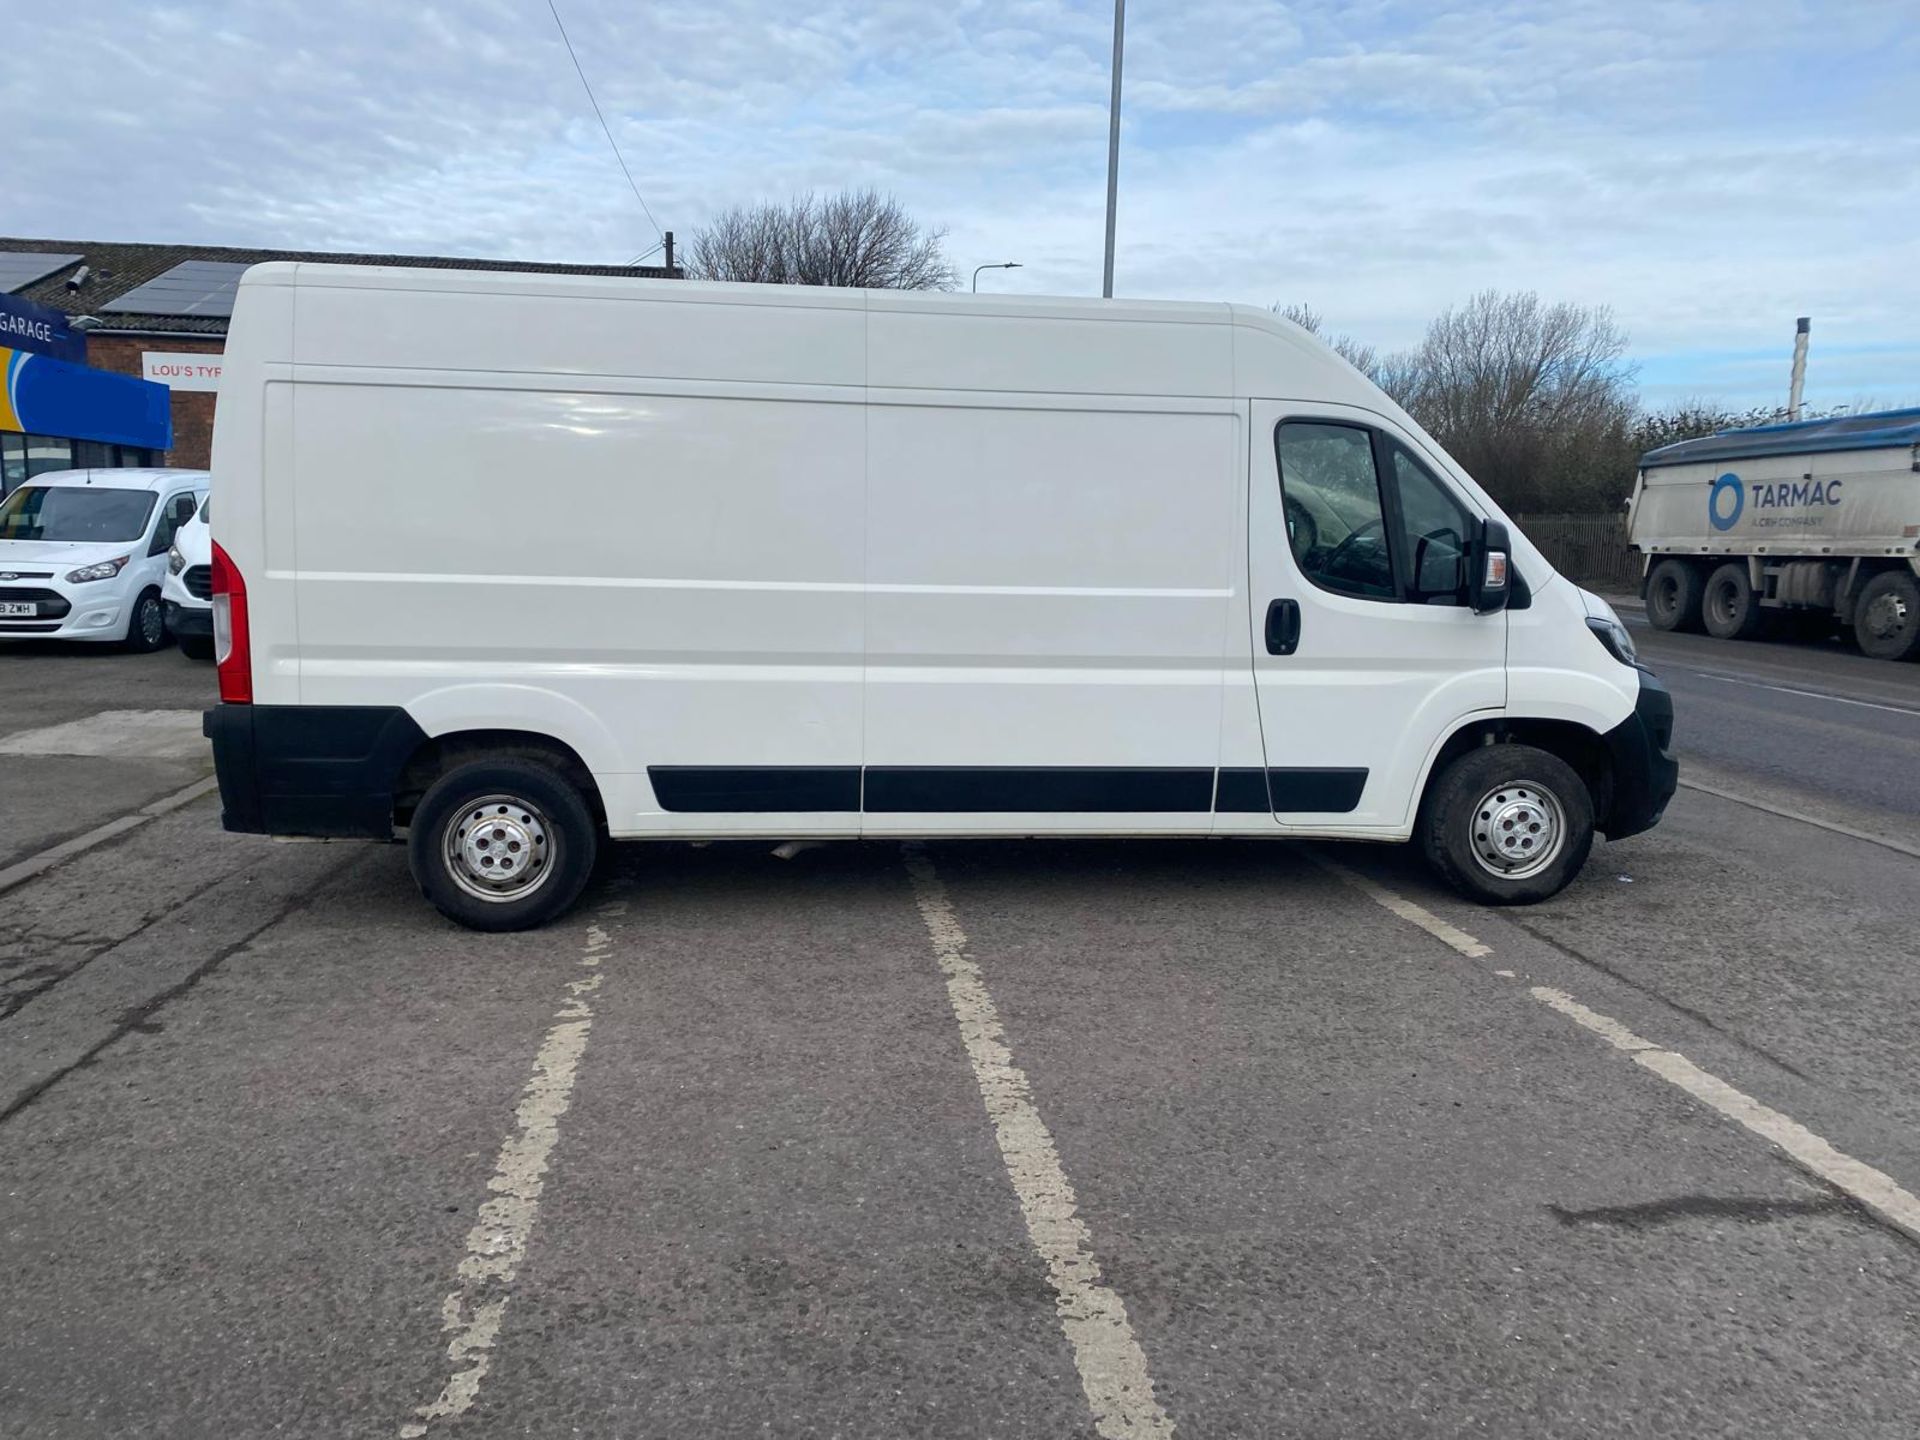 2019 69 PEUGEOT BOXER PANEL VAN - 57K MILES - EURO 6 - PLY LINED. - Image 9 of 12